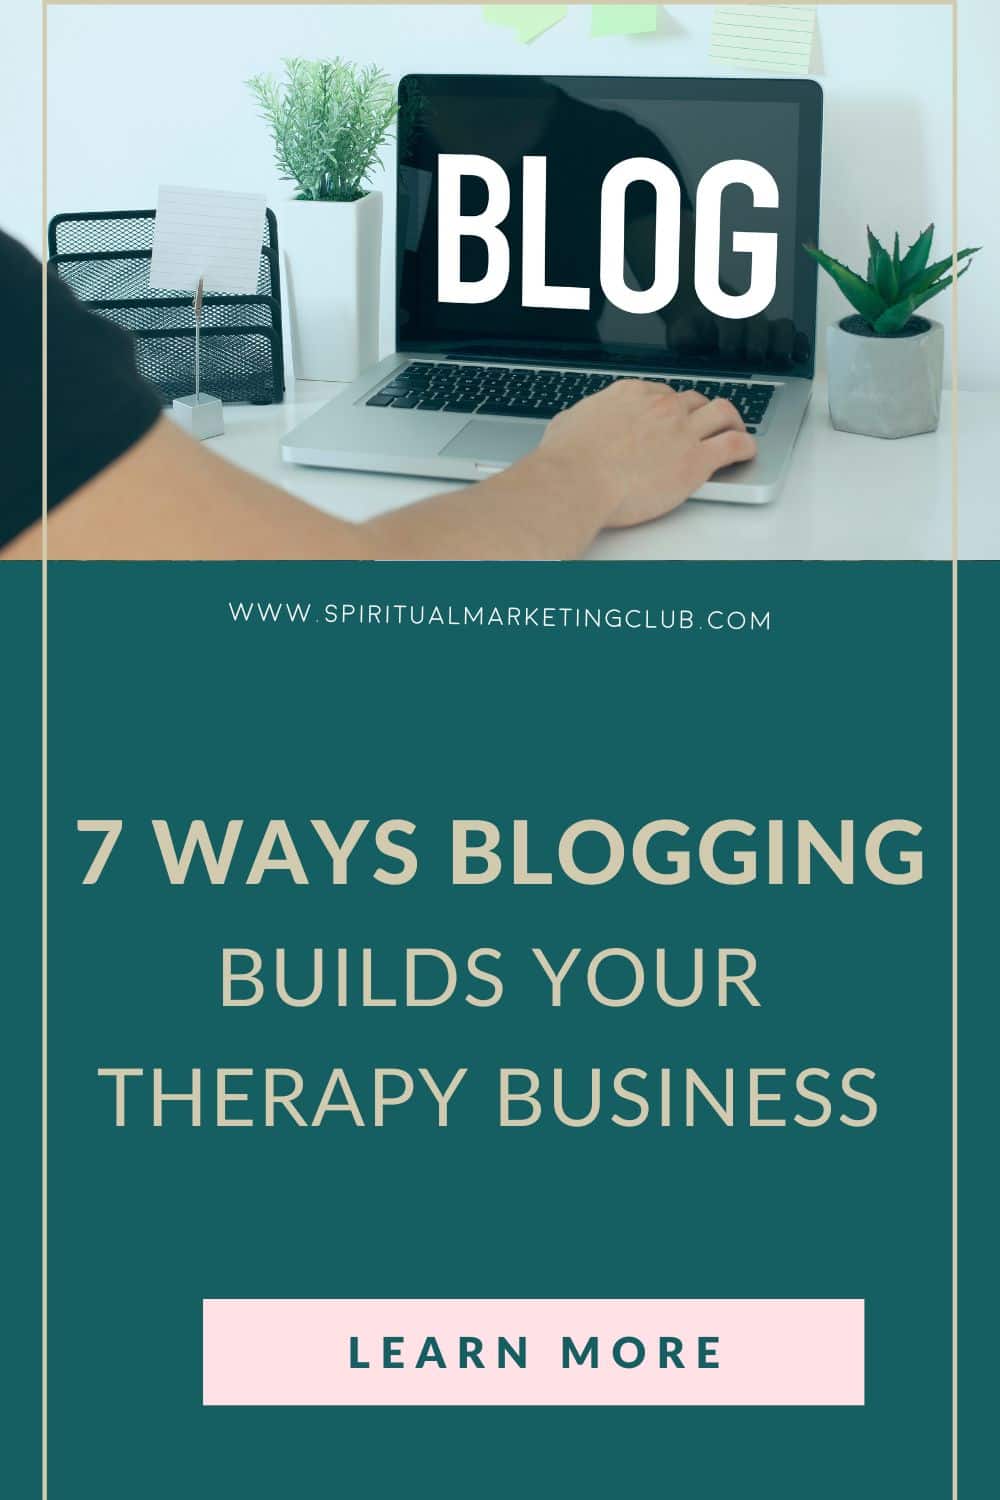 Blogging For Therapists, Healers and Coaches who want to reach a wider audience